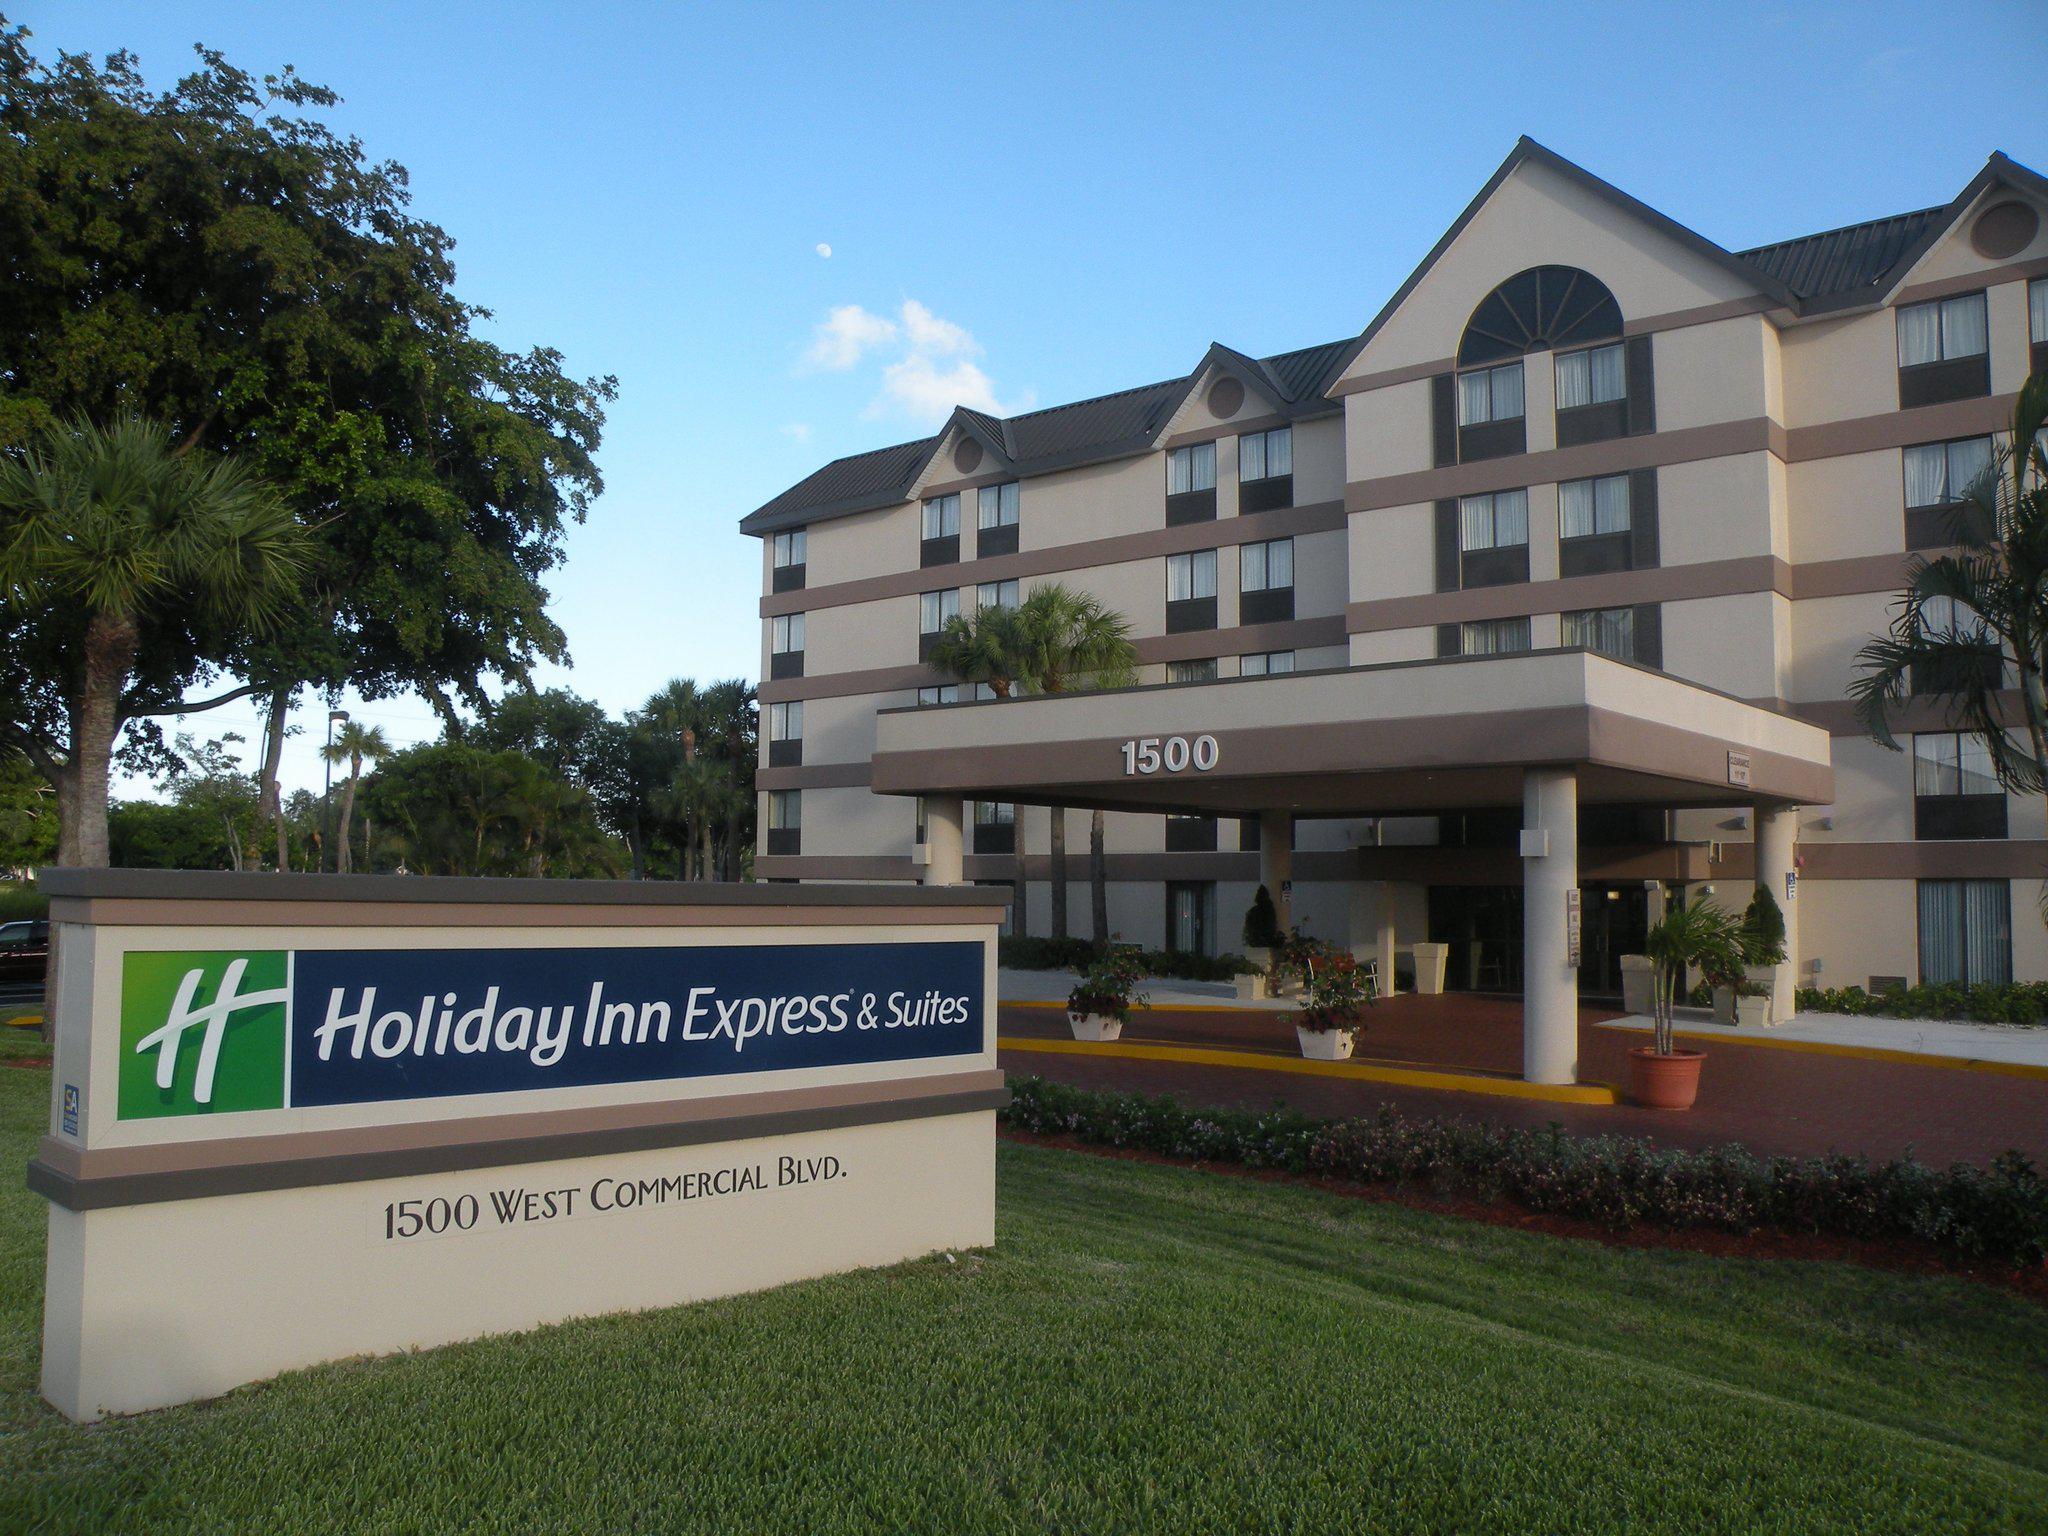 Holiday Inn Express & Suites Ft Lauderdale N - Exec Airport Photo